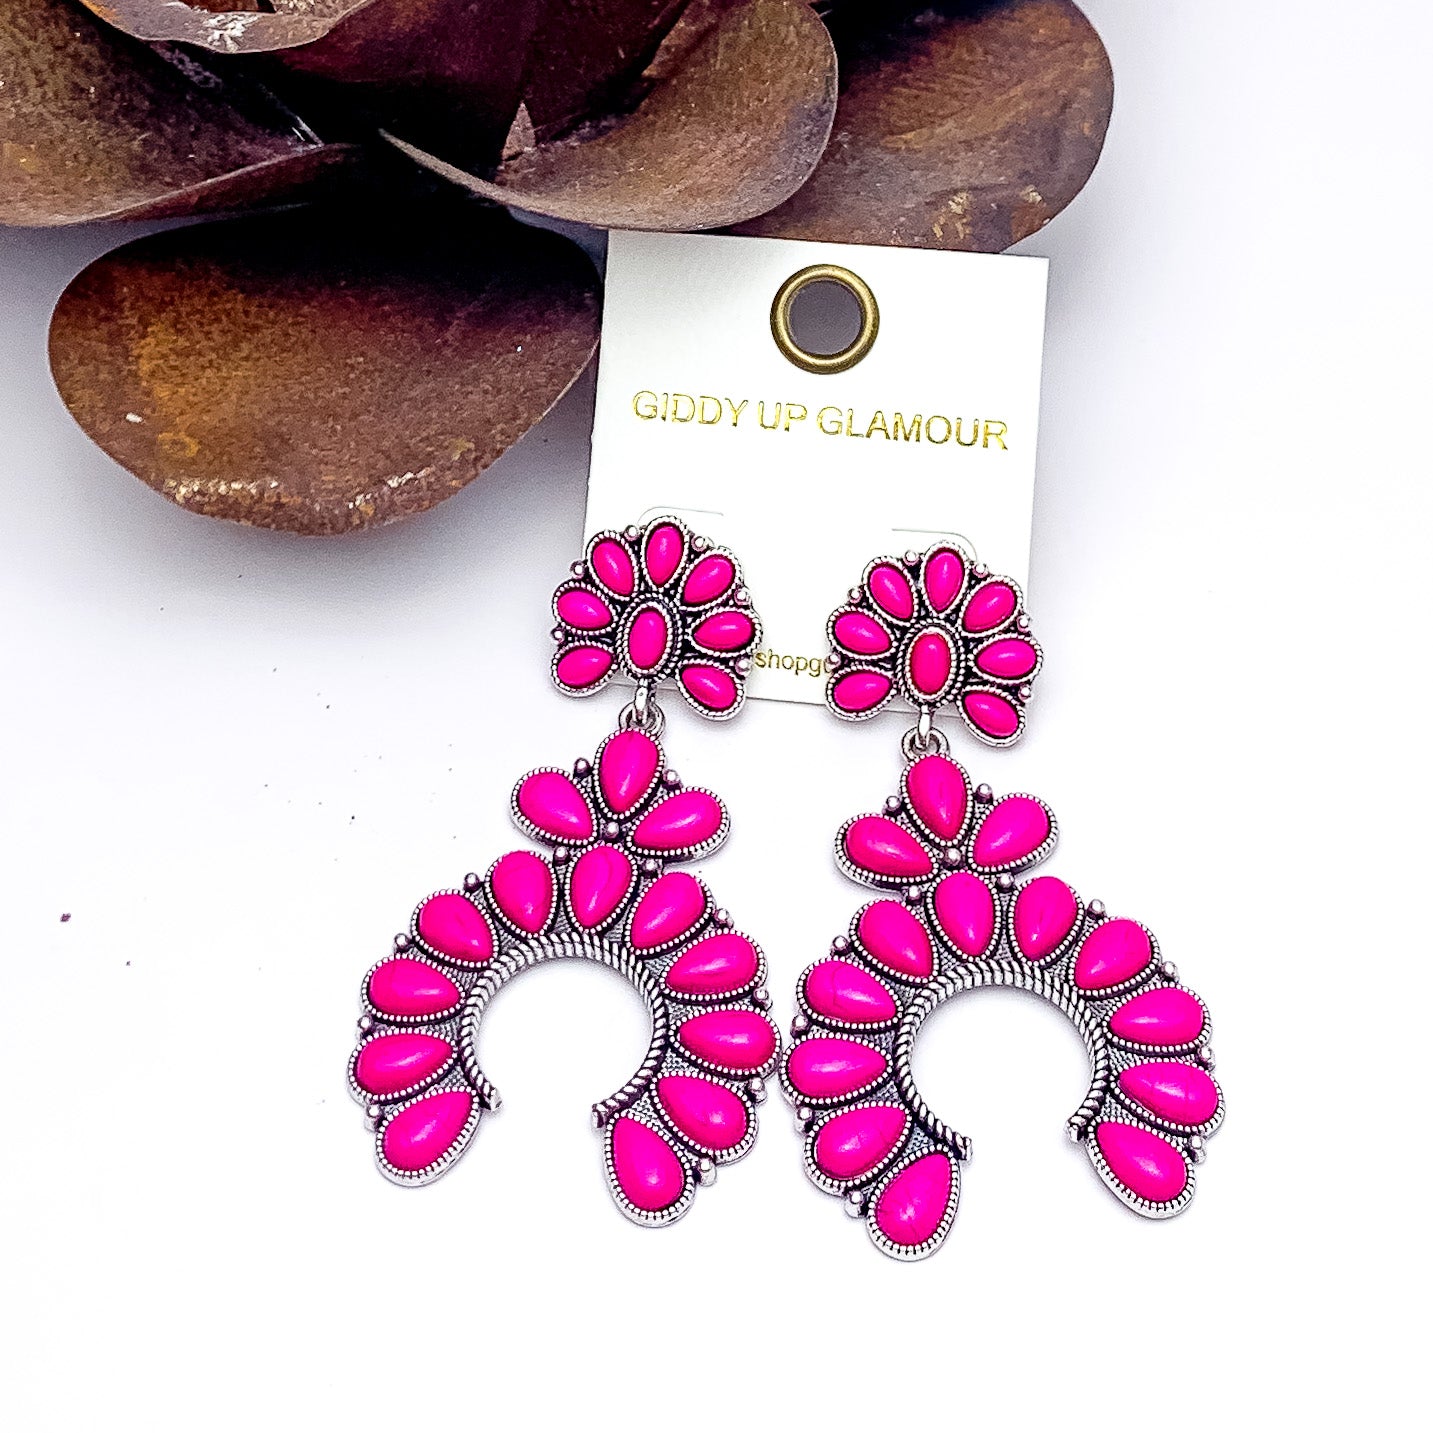 Western Naja Earrings in Silver Tone with Fuchsia Stones. Pictured on awhite background with a metal piece in the top left corner.